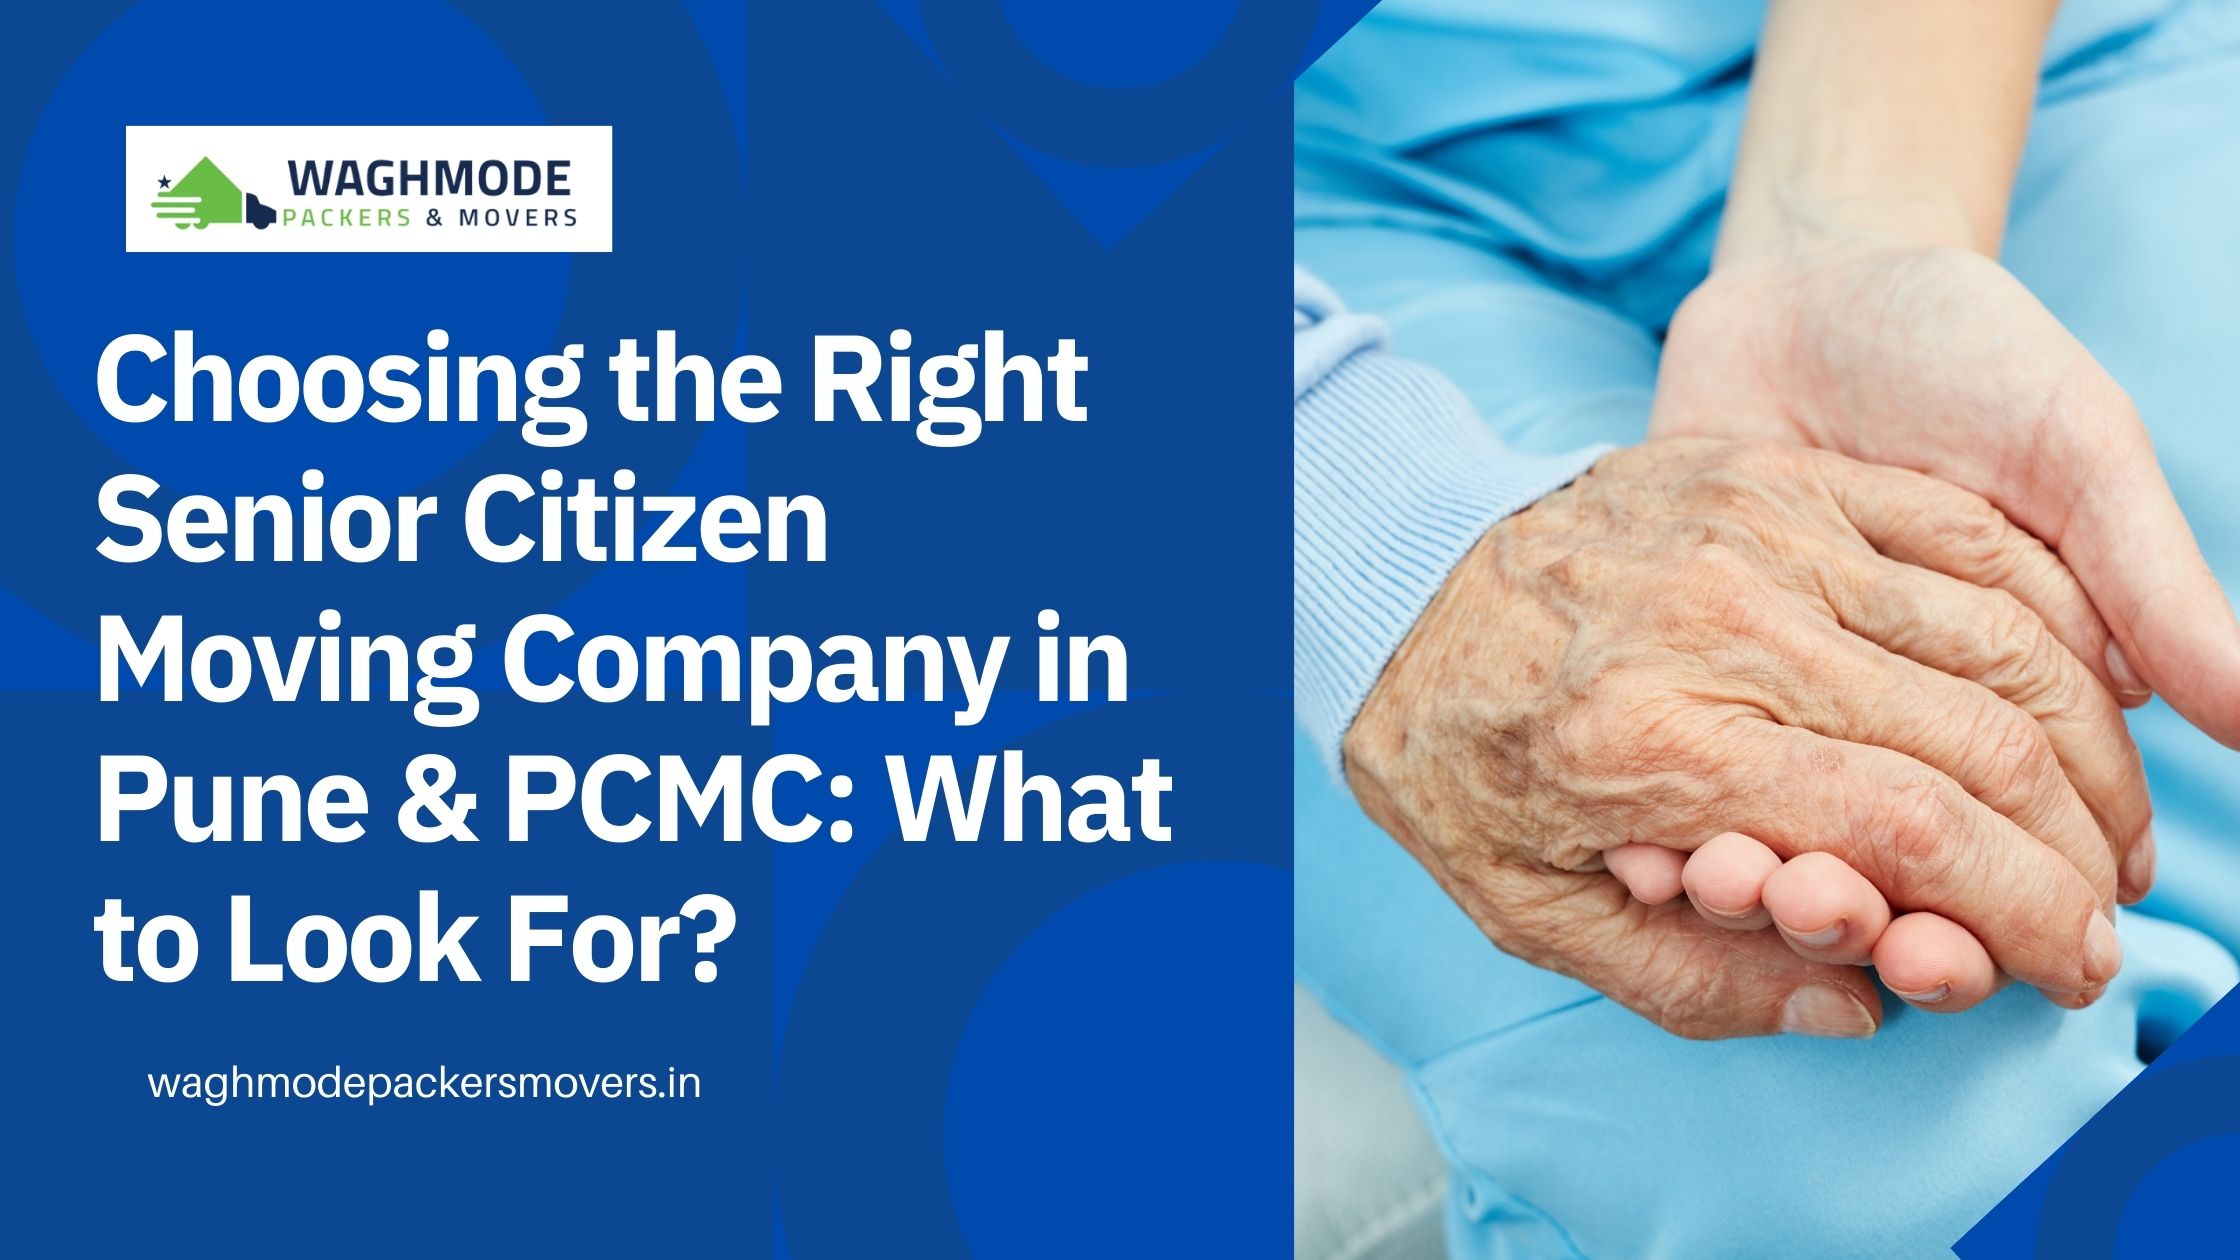 Choosing the Right Senior Citizen Moving Company in Pune & PCMC: What to Look For?